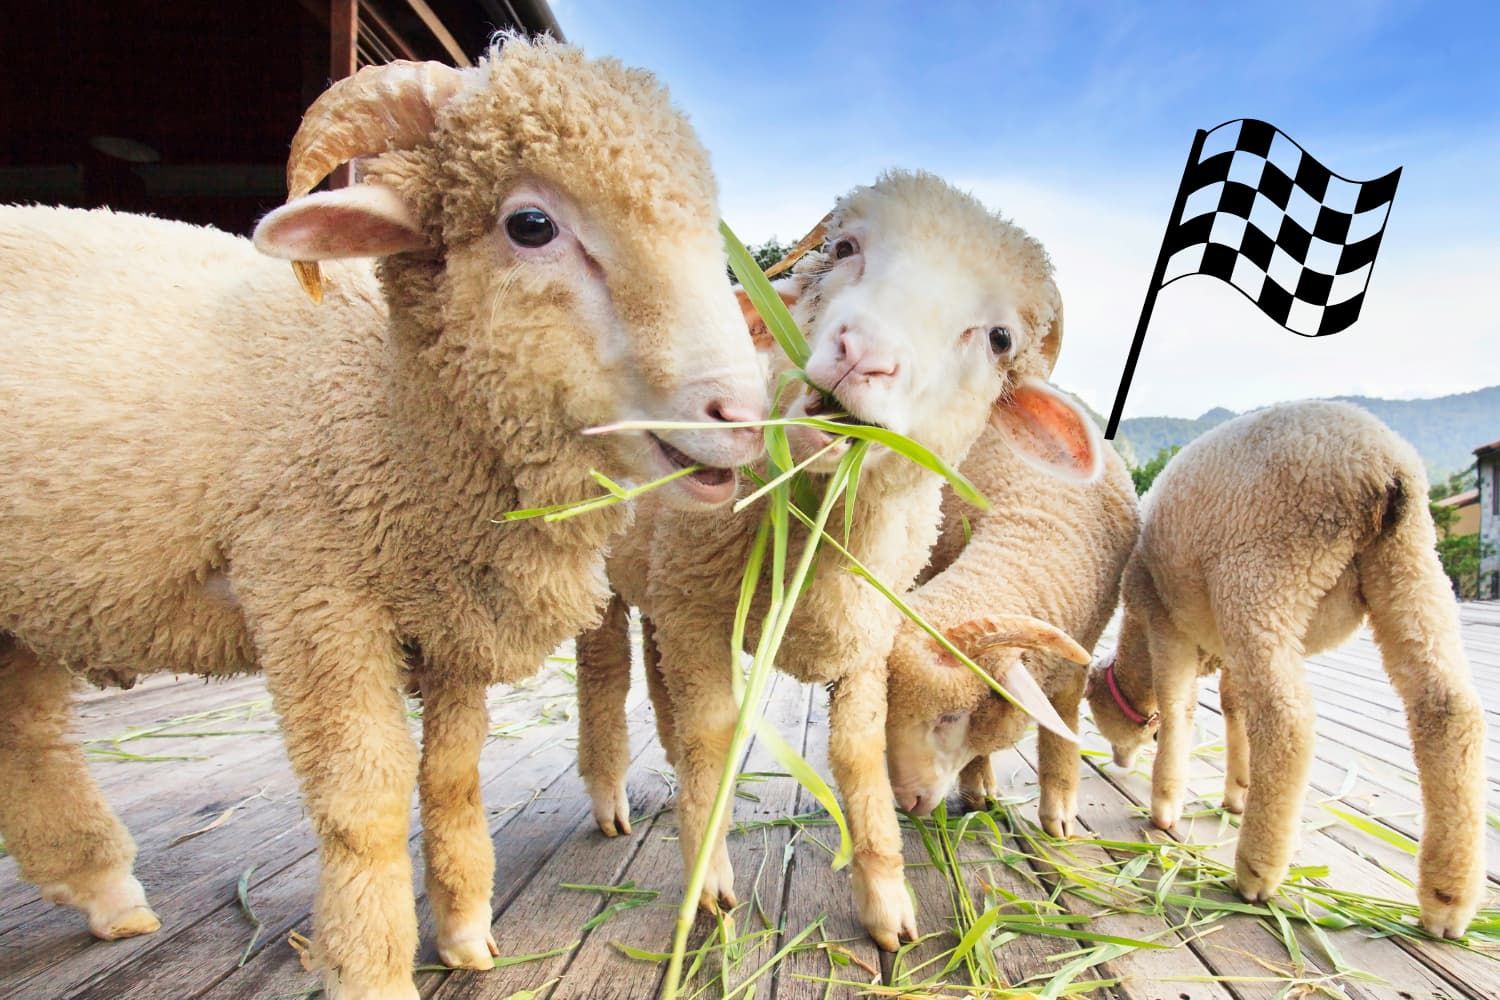 Game%20-%20OT%20Psalm%2023%20-%20The%20feed%20the%20sheep%20relay%20race-6bb58723 Death / funeral